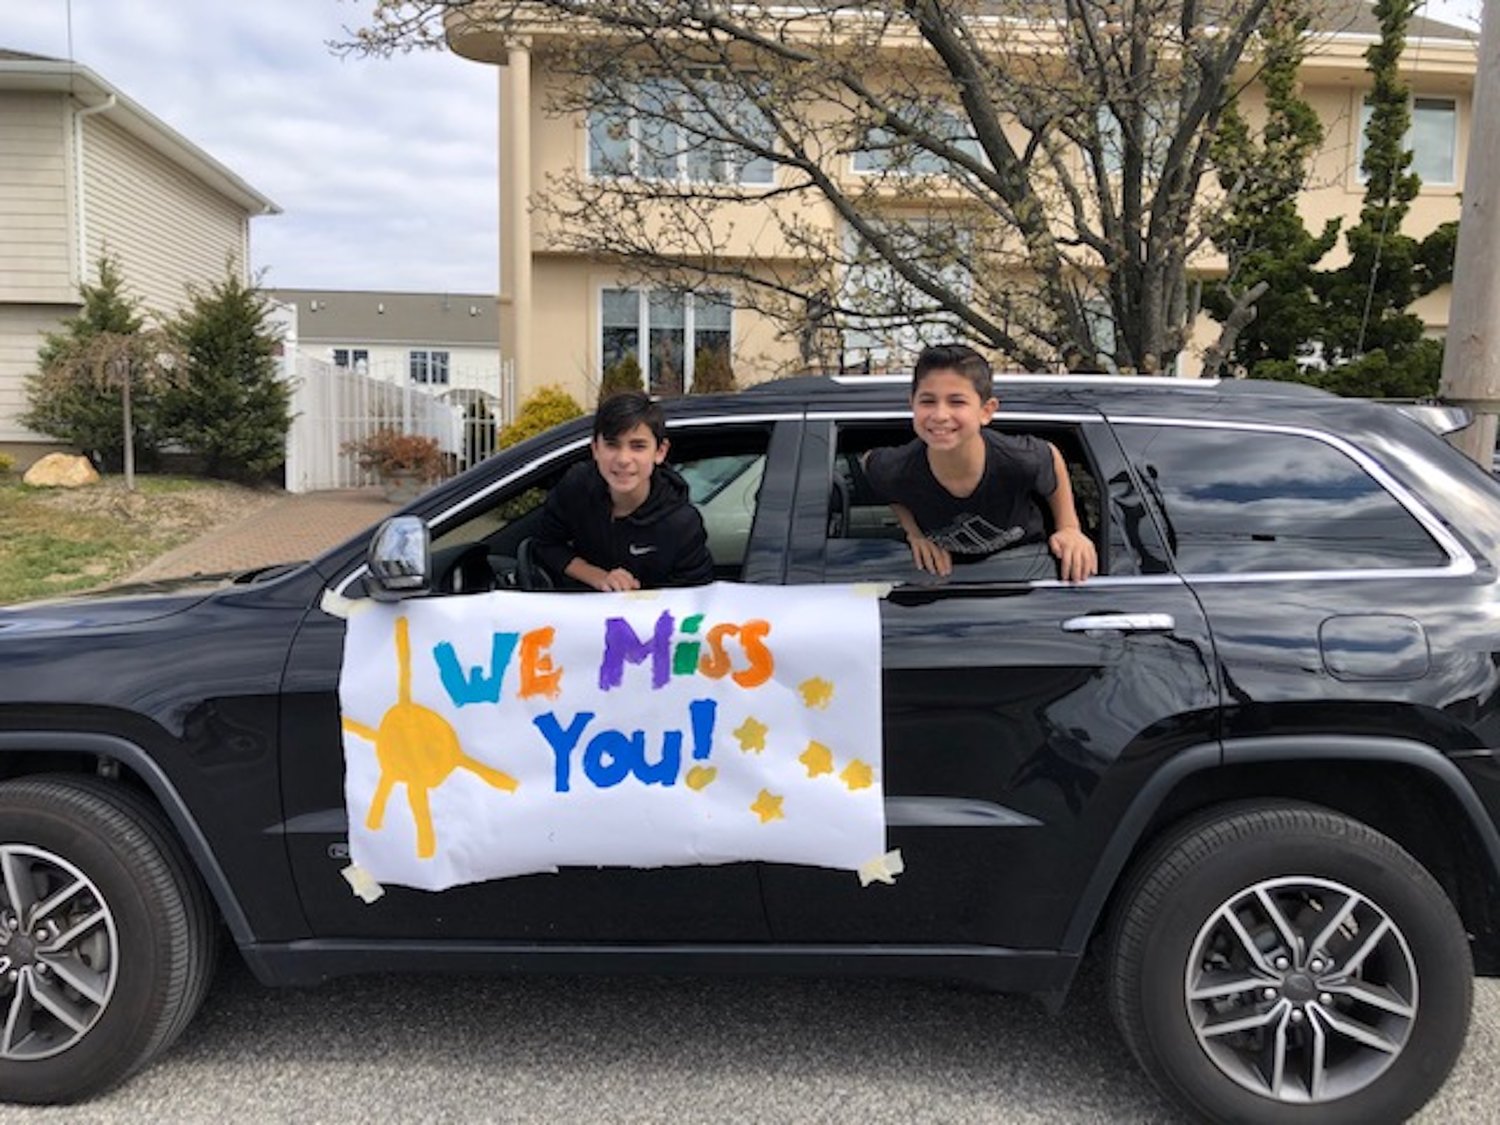 Brothers Jayden, 12, and Jared Eisenberg, 10, used their parents’ car to send a special message to their teachers.